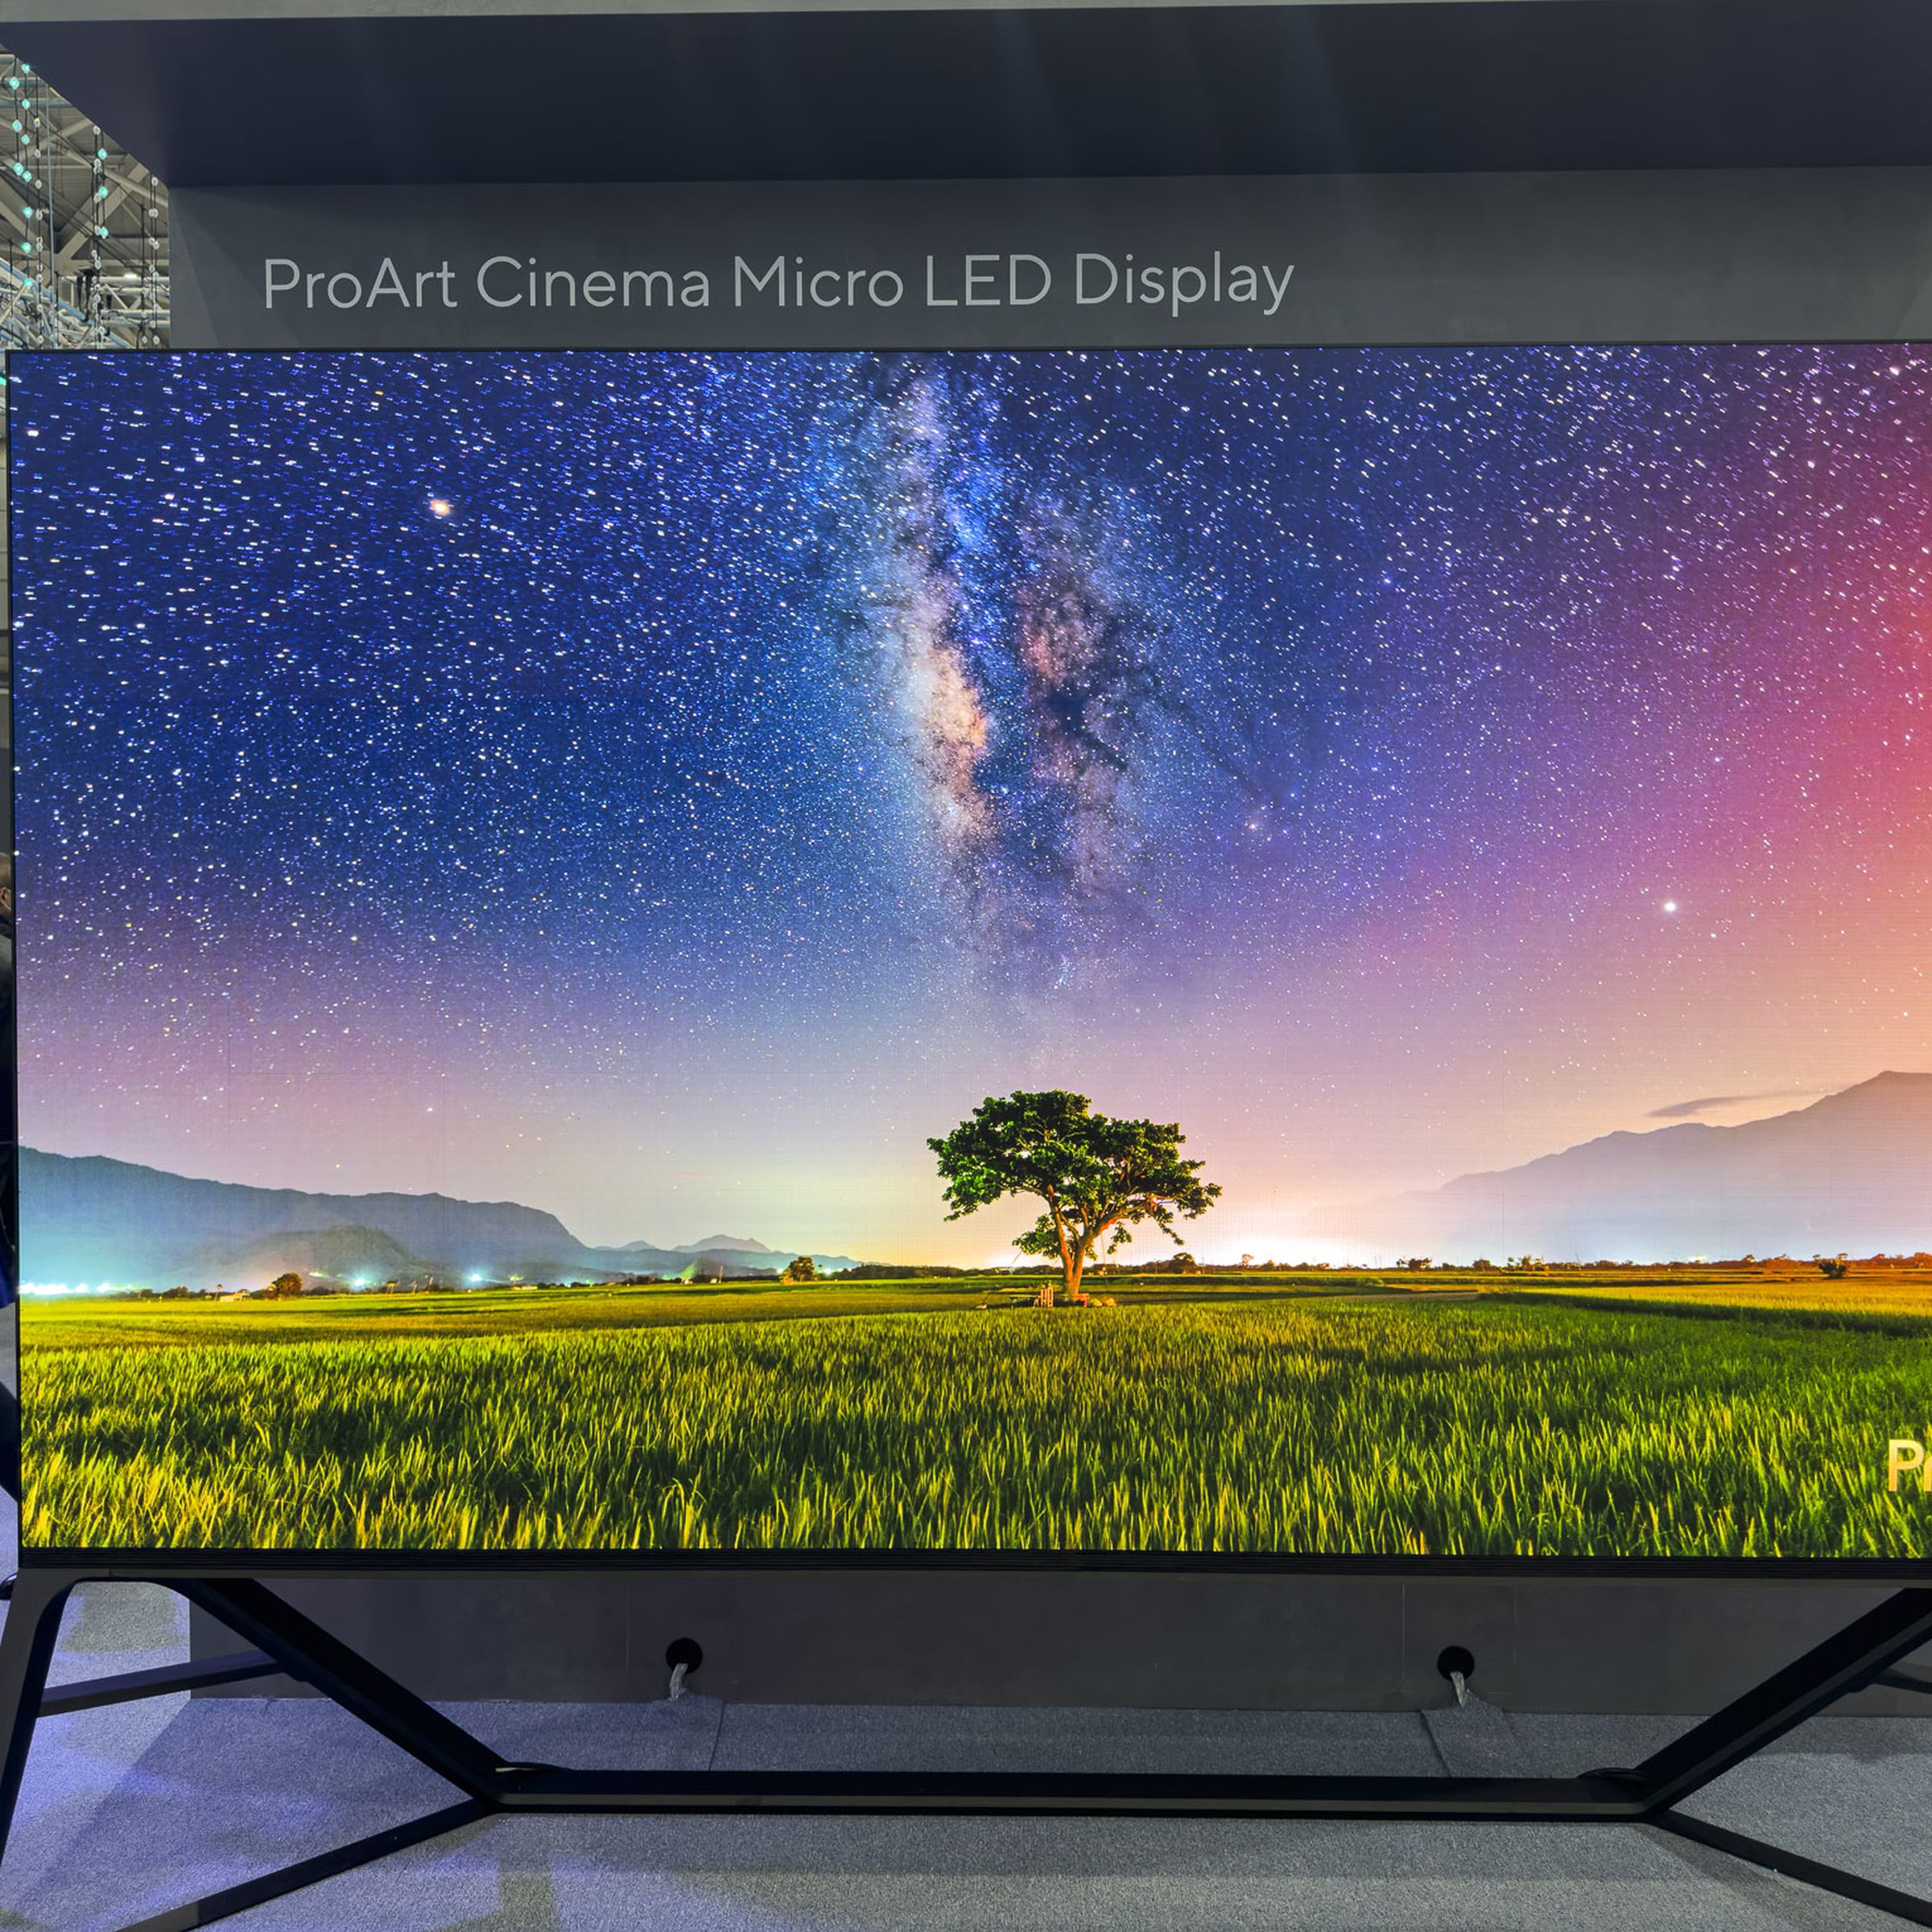 The Asus ProArt Cinema PQ07 displaying an outdoor scene with a tree and a colorful sky on the Computex 2023 show floor.